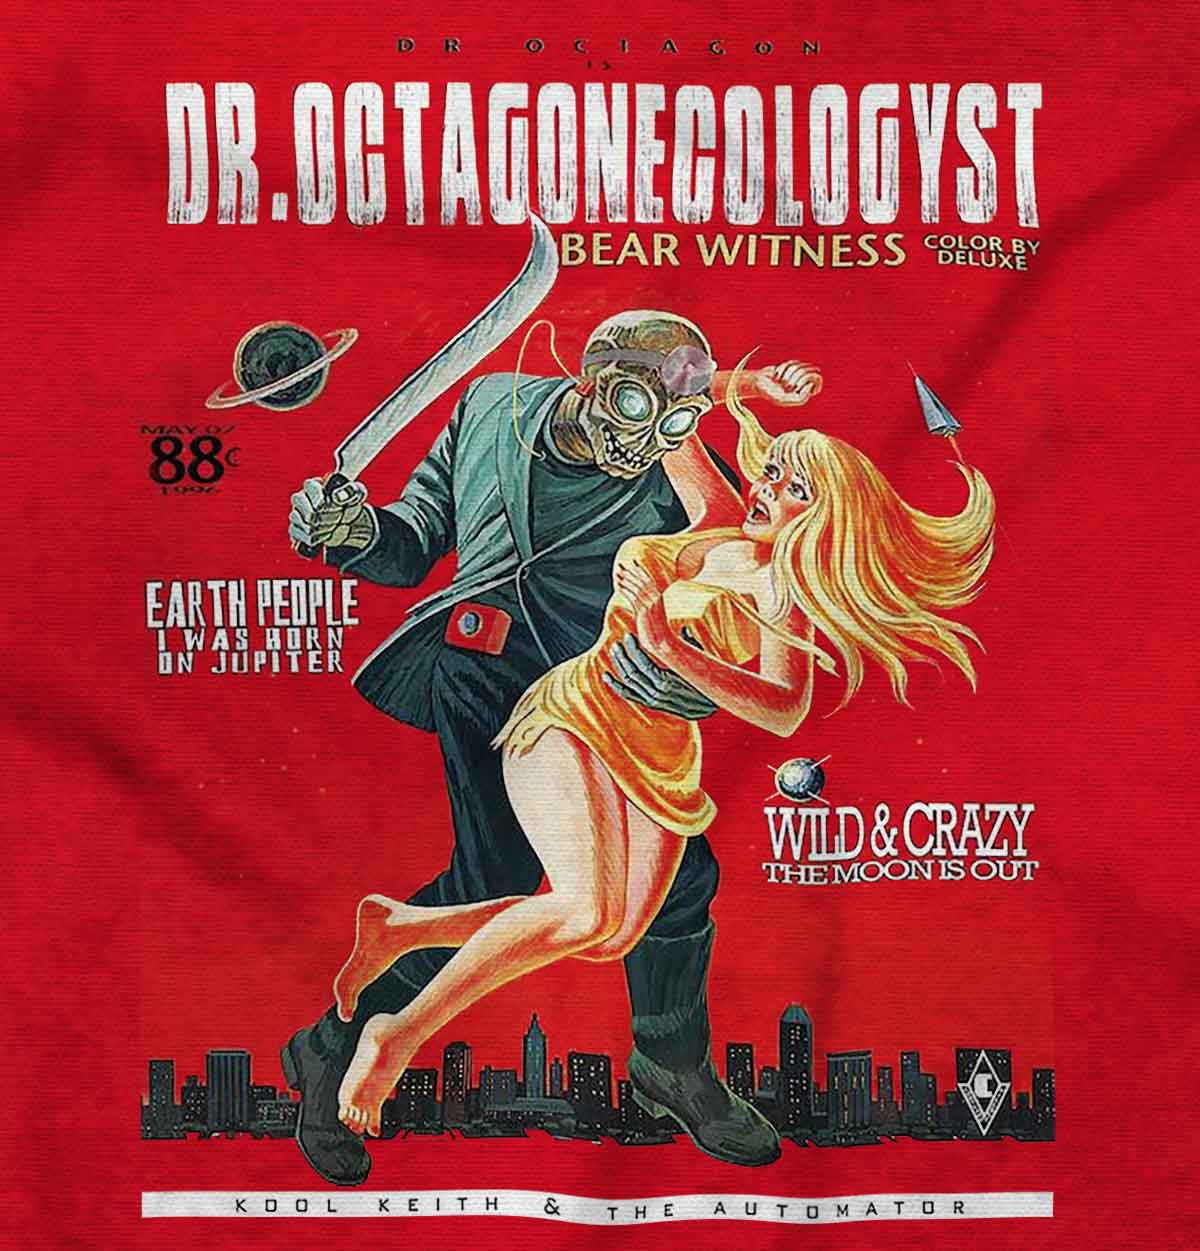 This shirt pays homage to Dr. Octagon, a game-changing hip-hop project by Kool Keith and Dan The Automator. It offers a unique and authentic alternative image of Dr. Octagon signifying mainstream rap, showcasing their innovative and free-spirited approach.